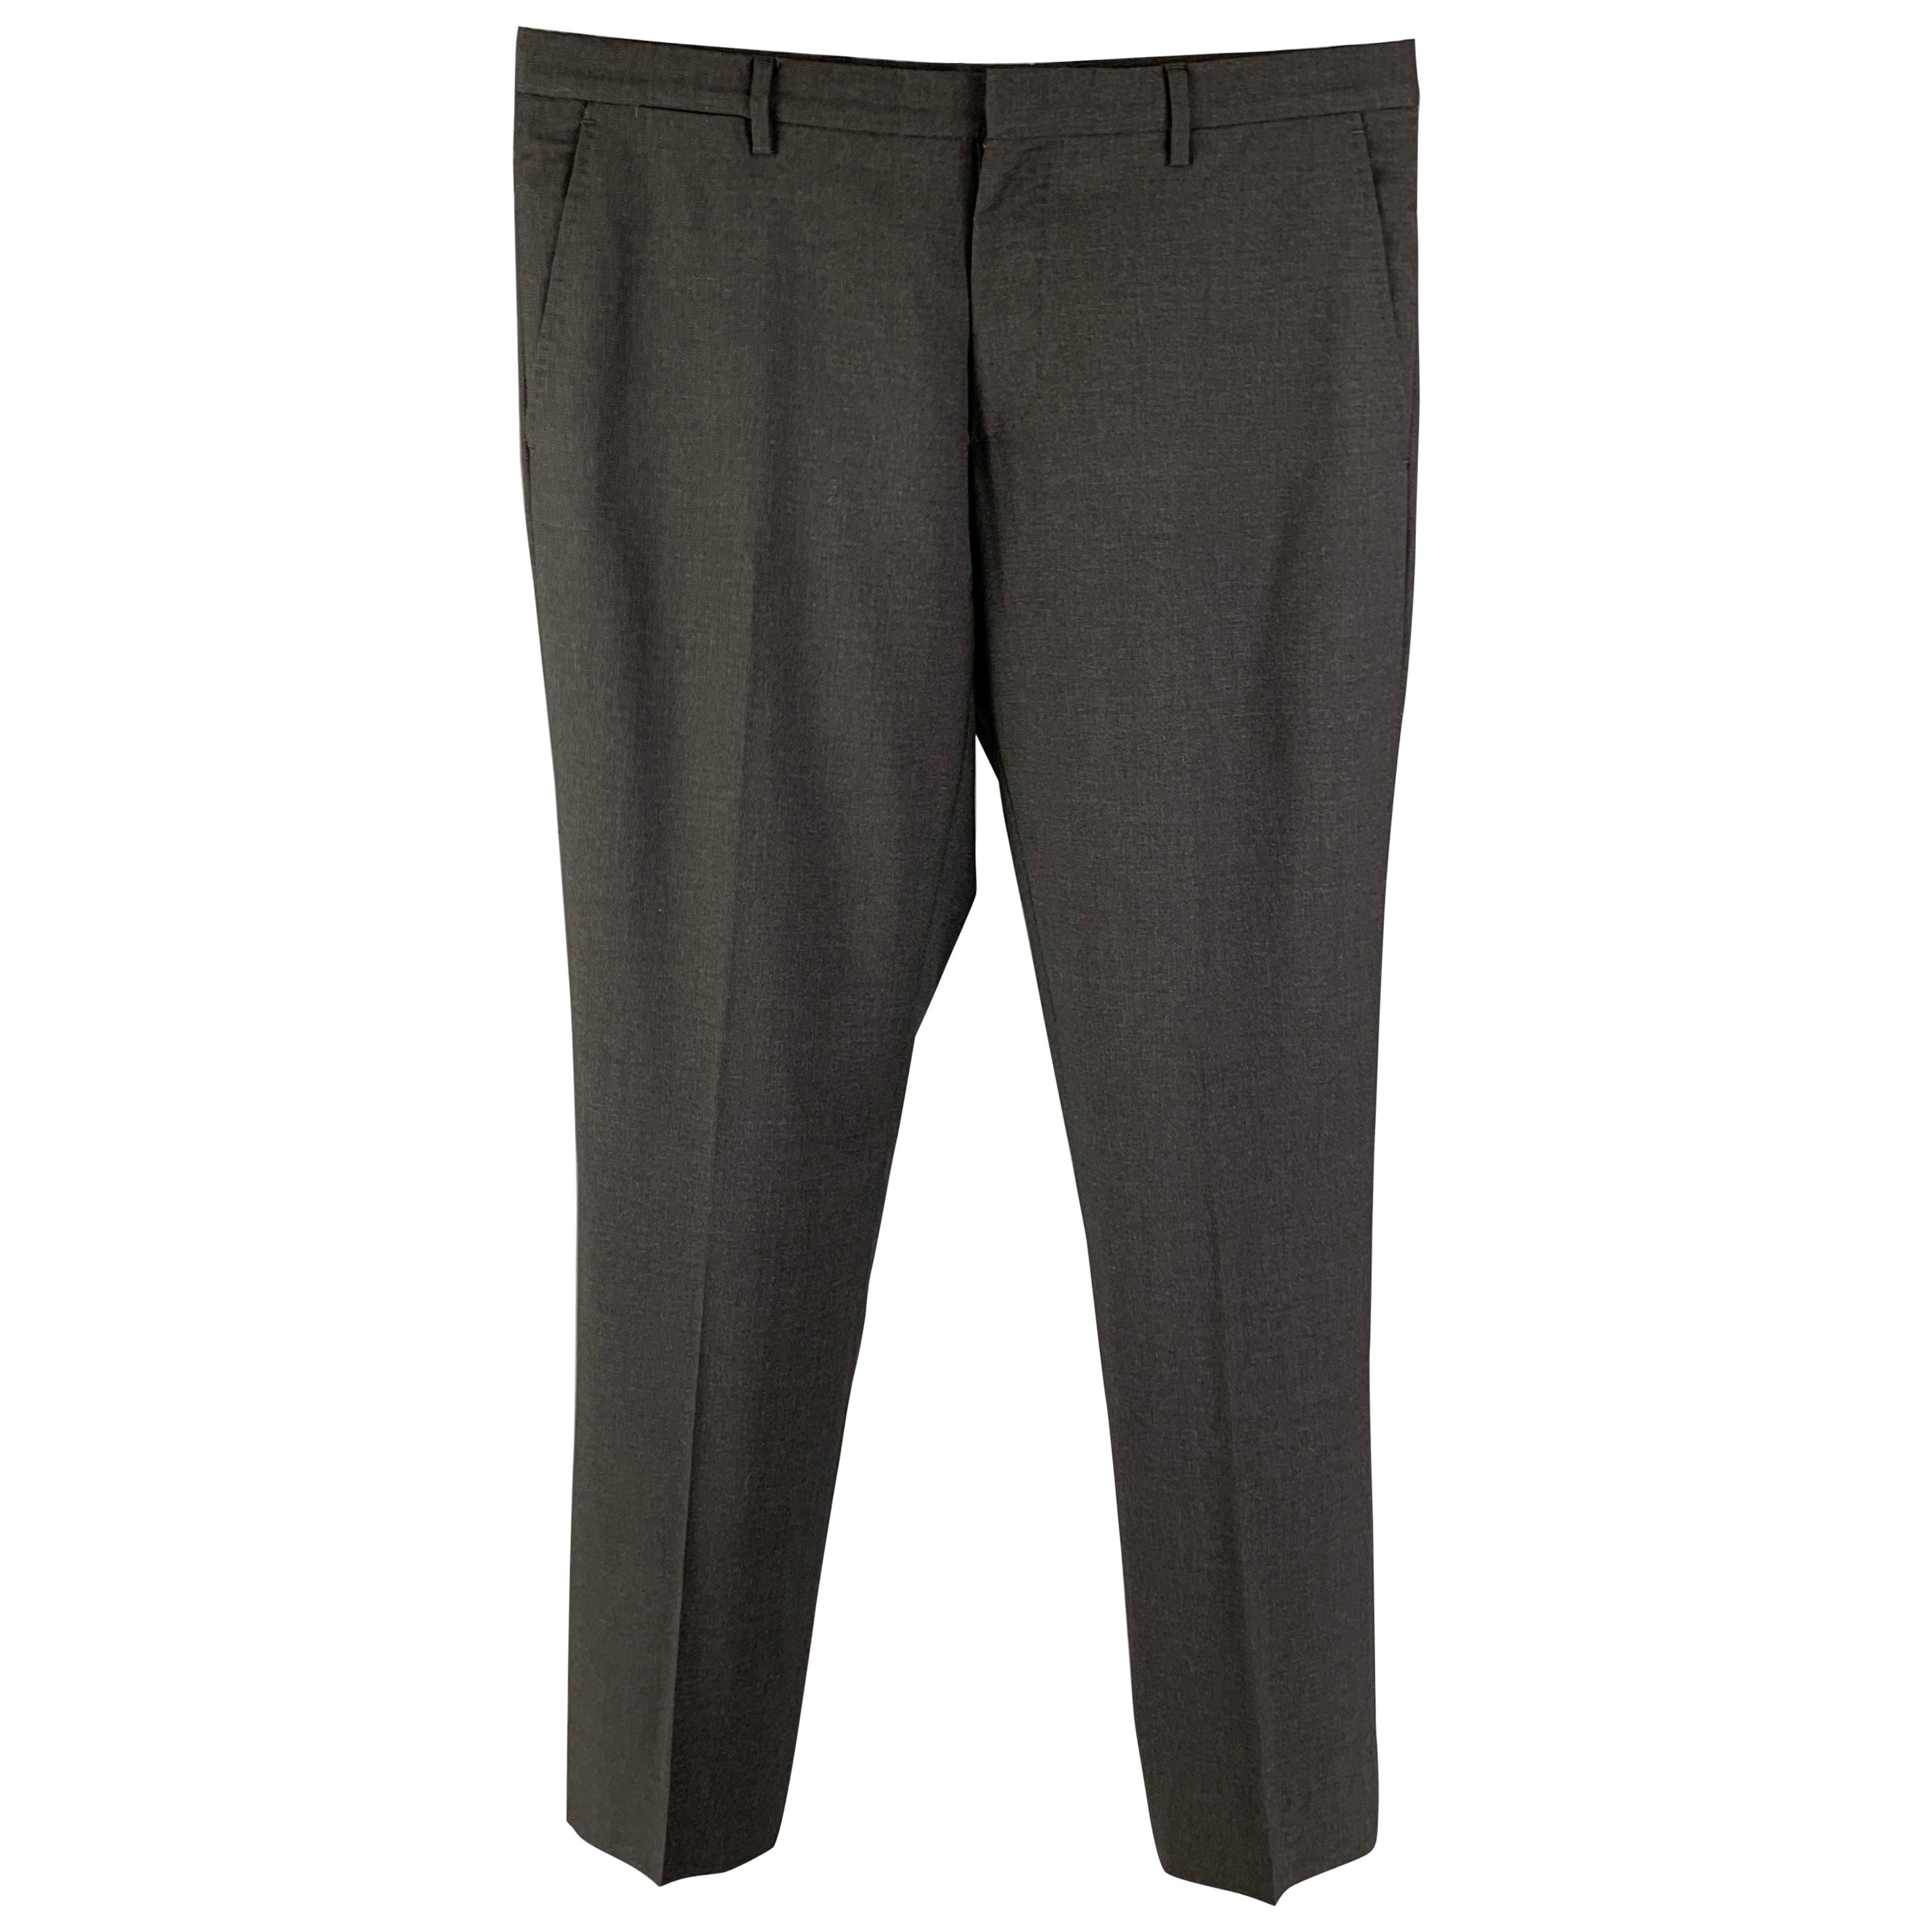 BURBERRY LONDON Size 34 Charcoal Virgin Wool Flat Front Dress Pants For Sale